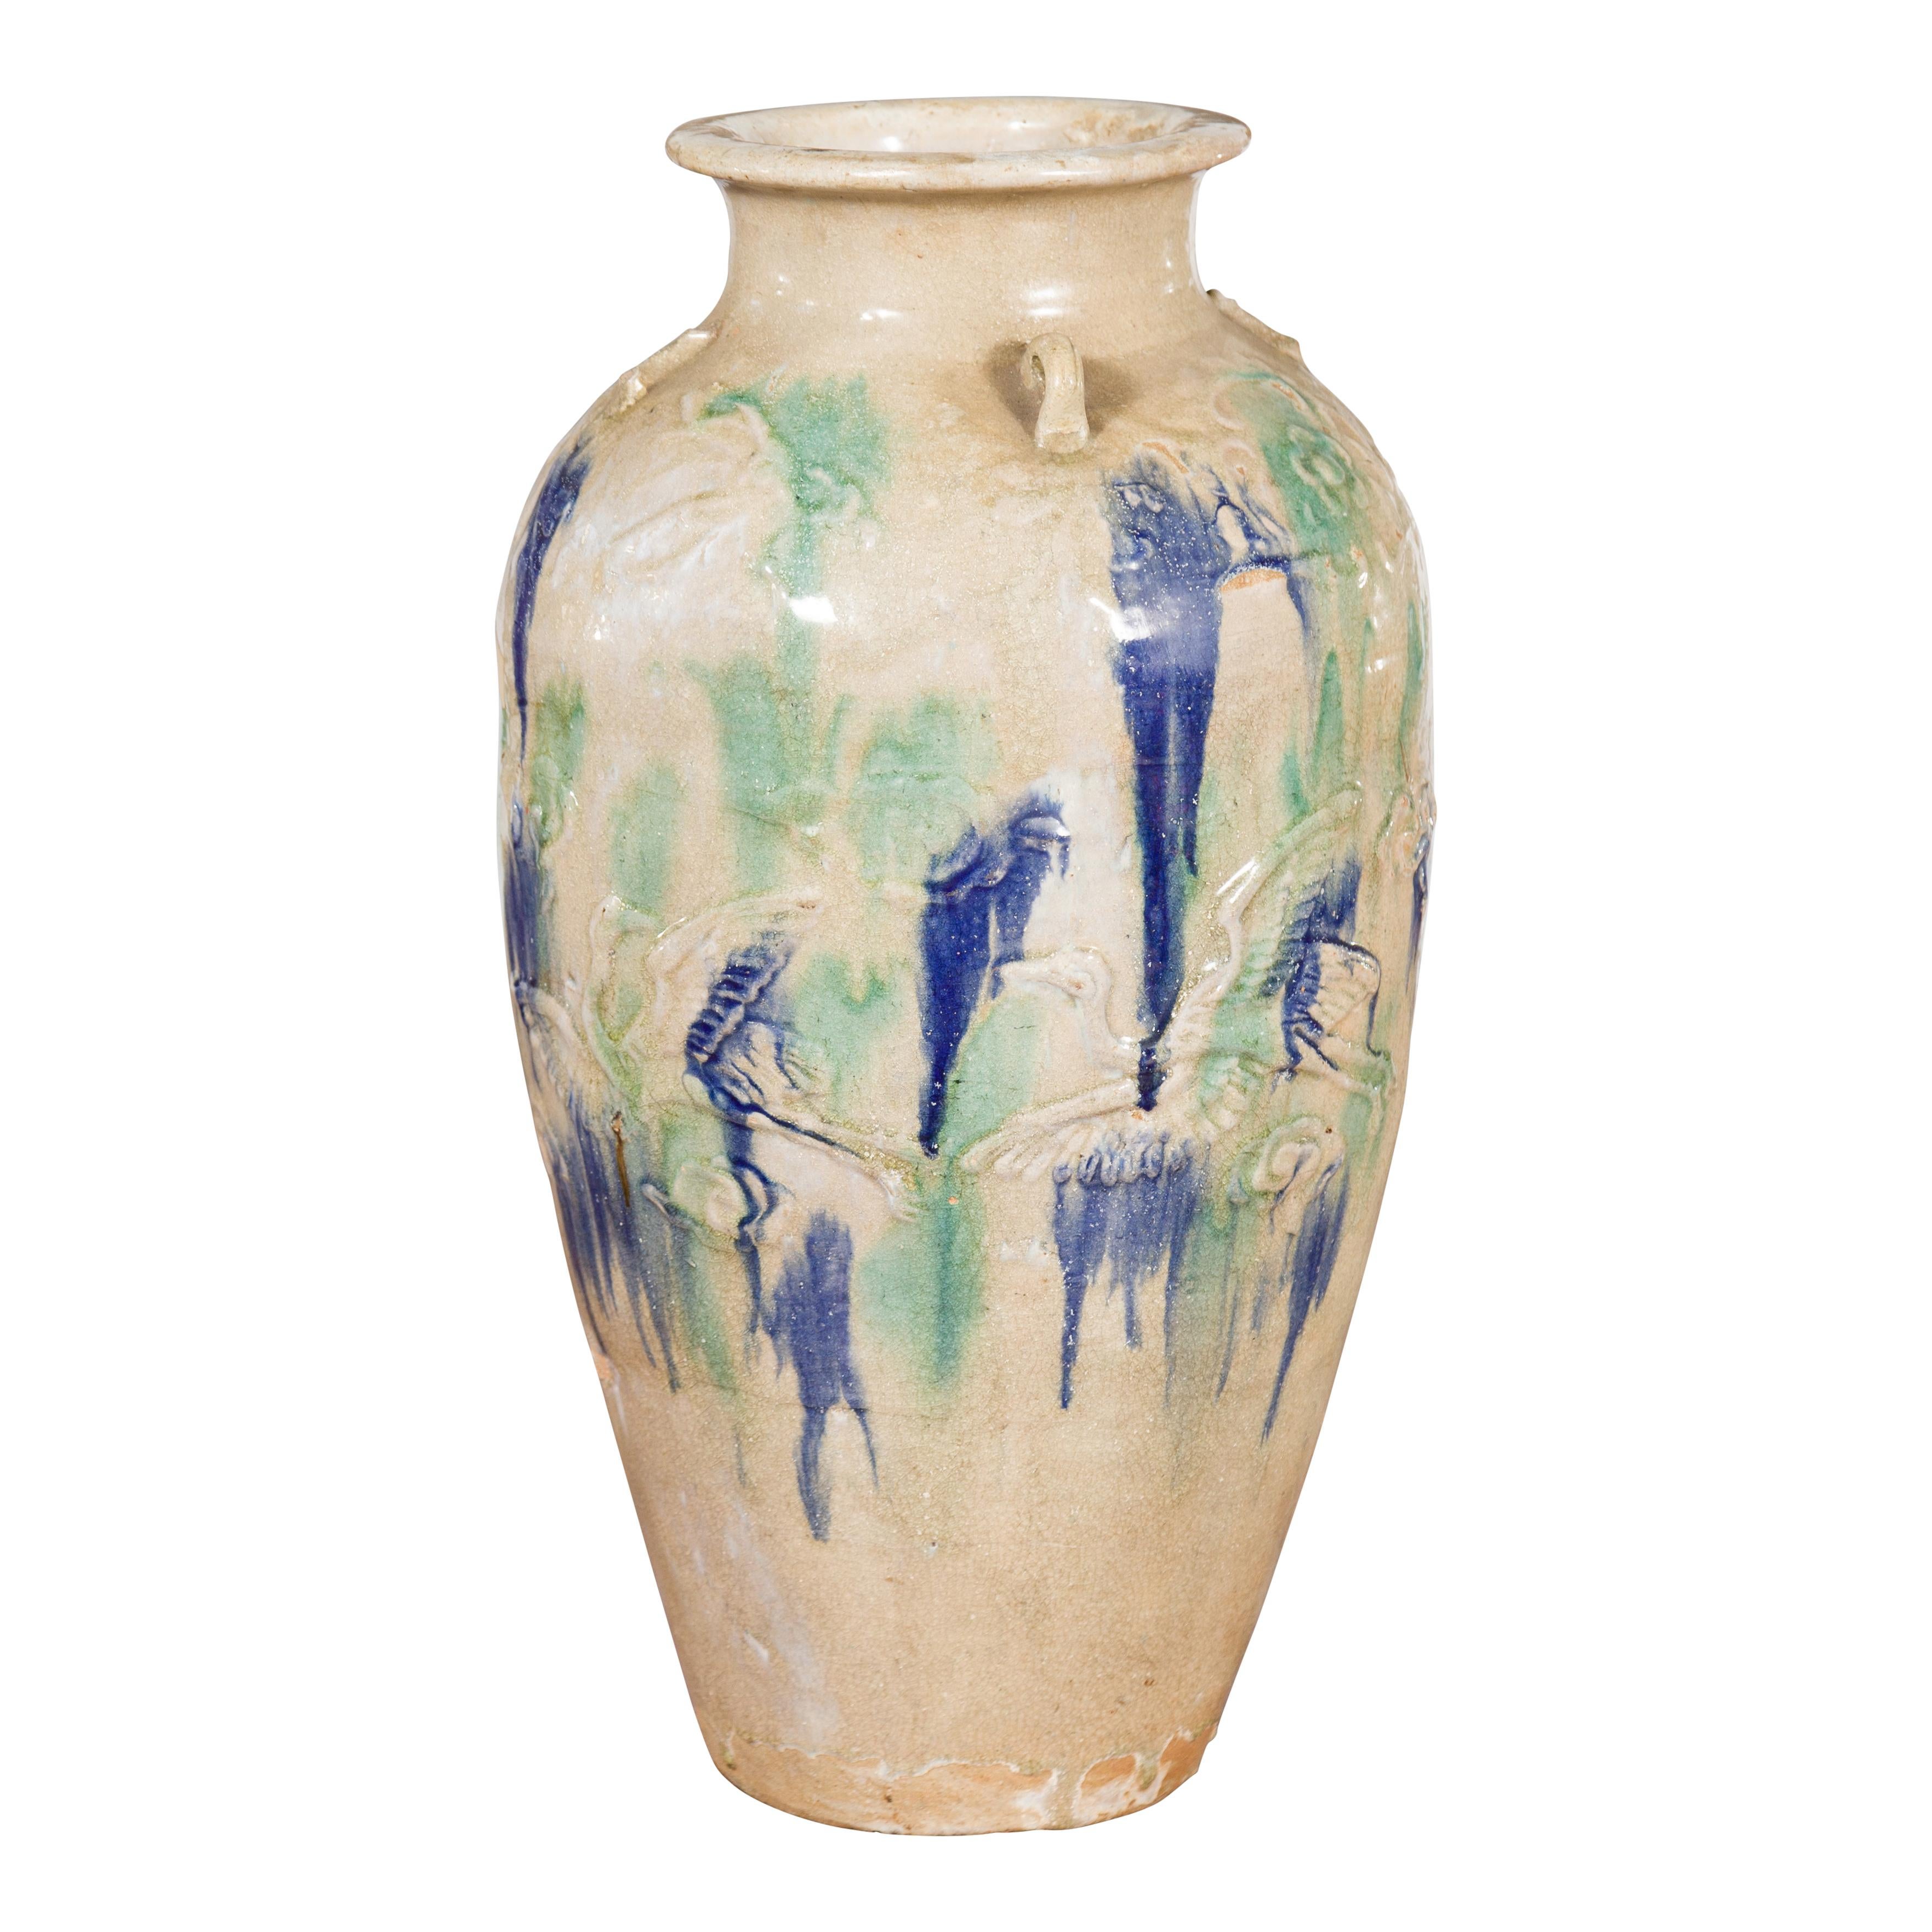 An antique Annamese ceramic storage vessel from the 19th century, with blue and green glaze and loop handles. Created during the 19th century, this large Annamese storage vessel features a cream toned tapering body adorned with green and blue glazed